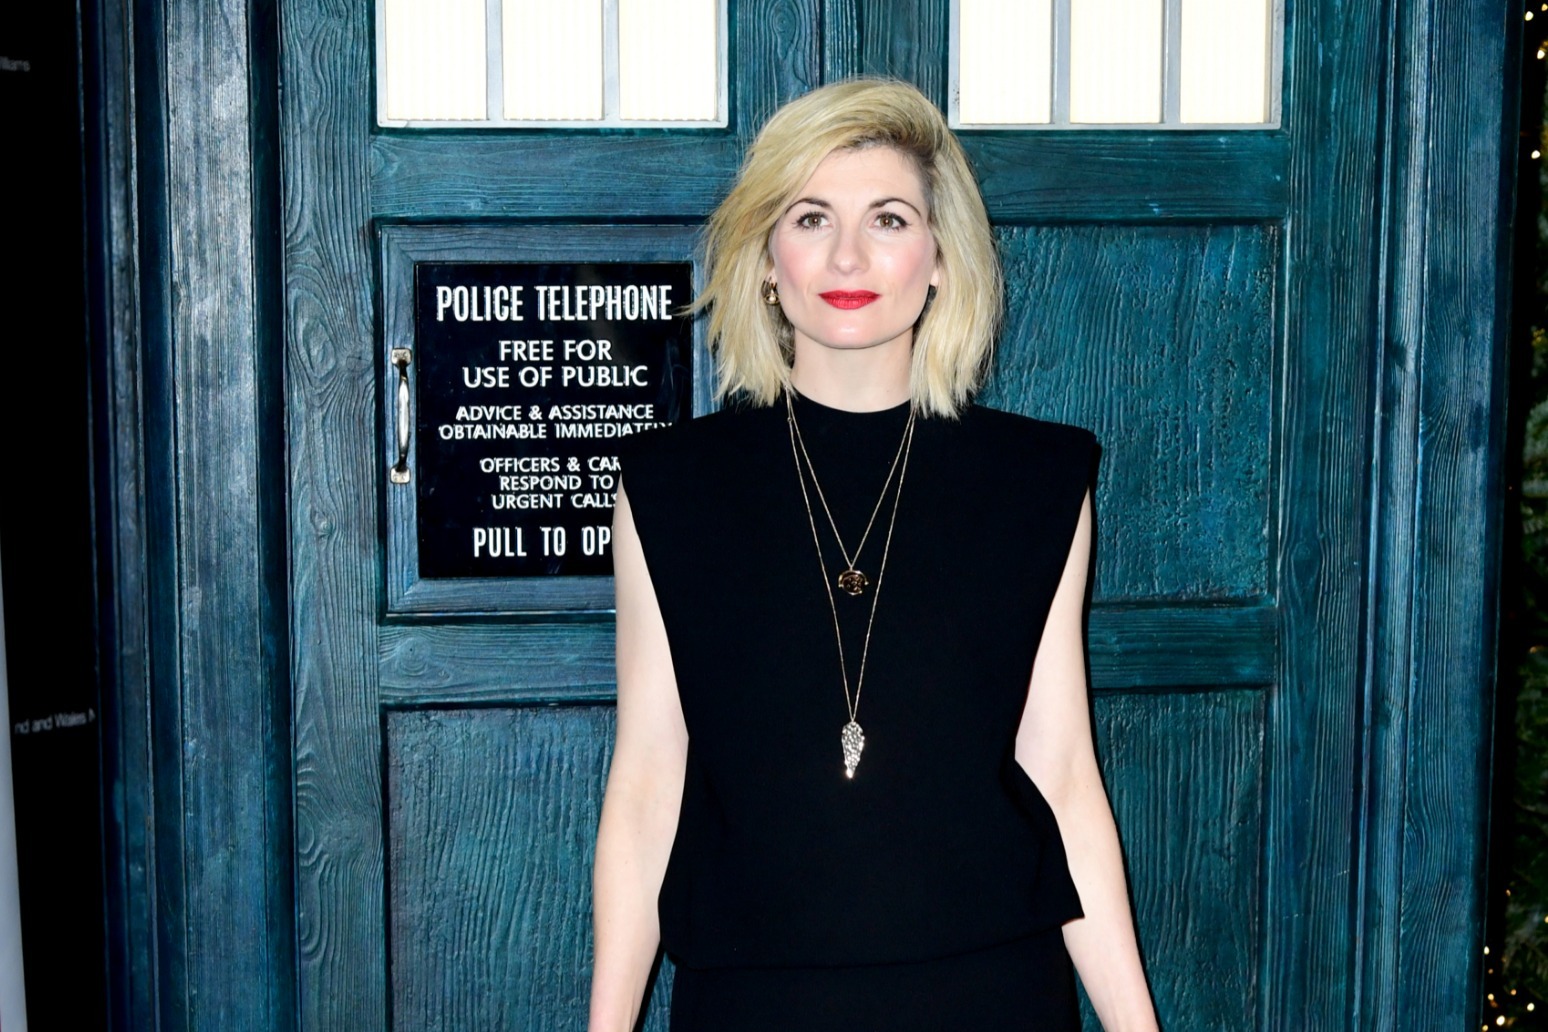 Jodie Whittaker on filming her final series of Doctor Who during the pandemic 